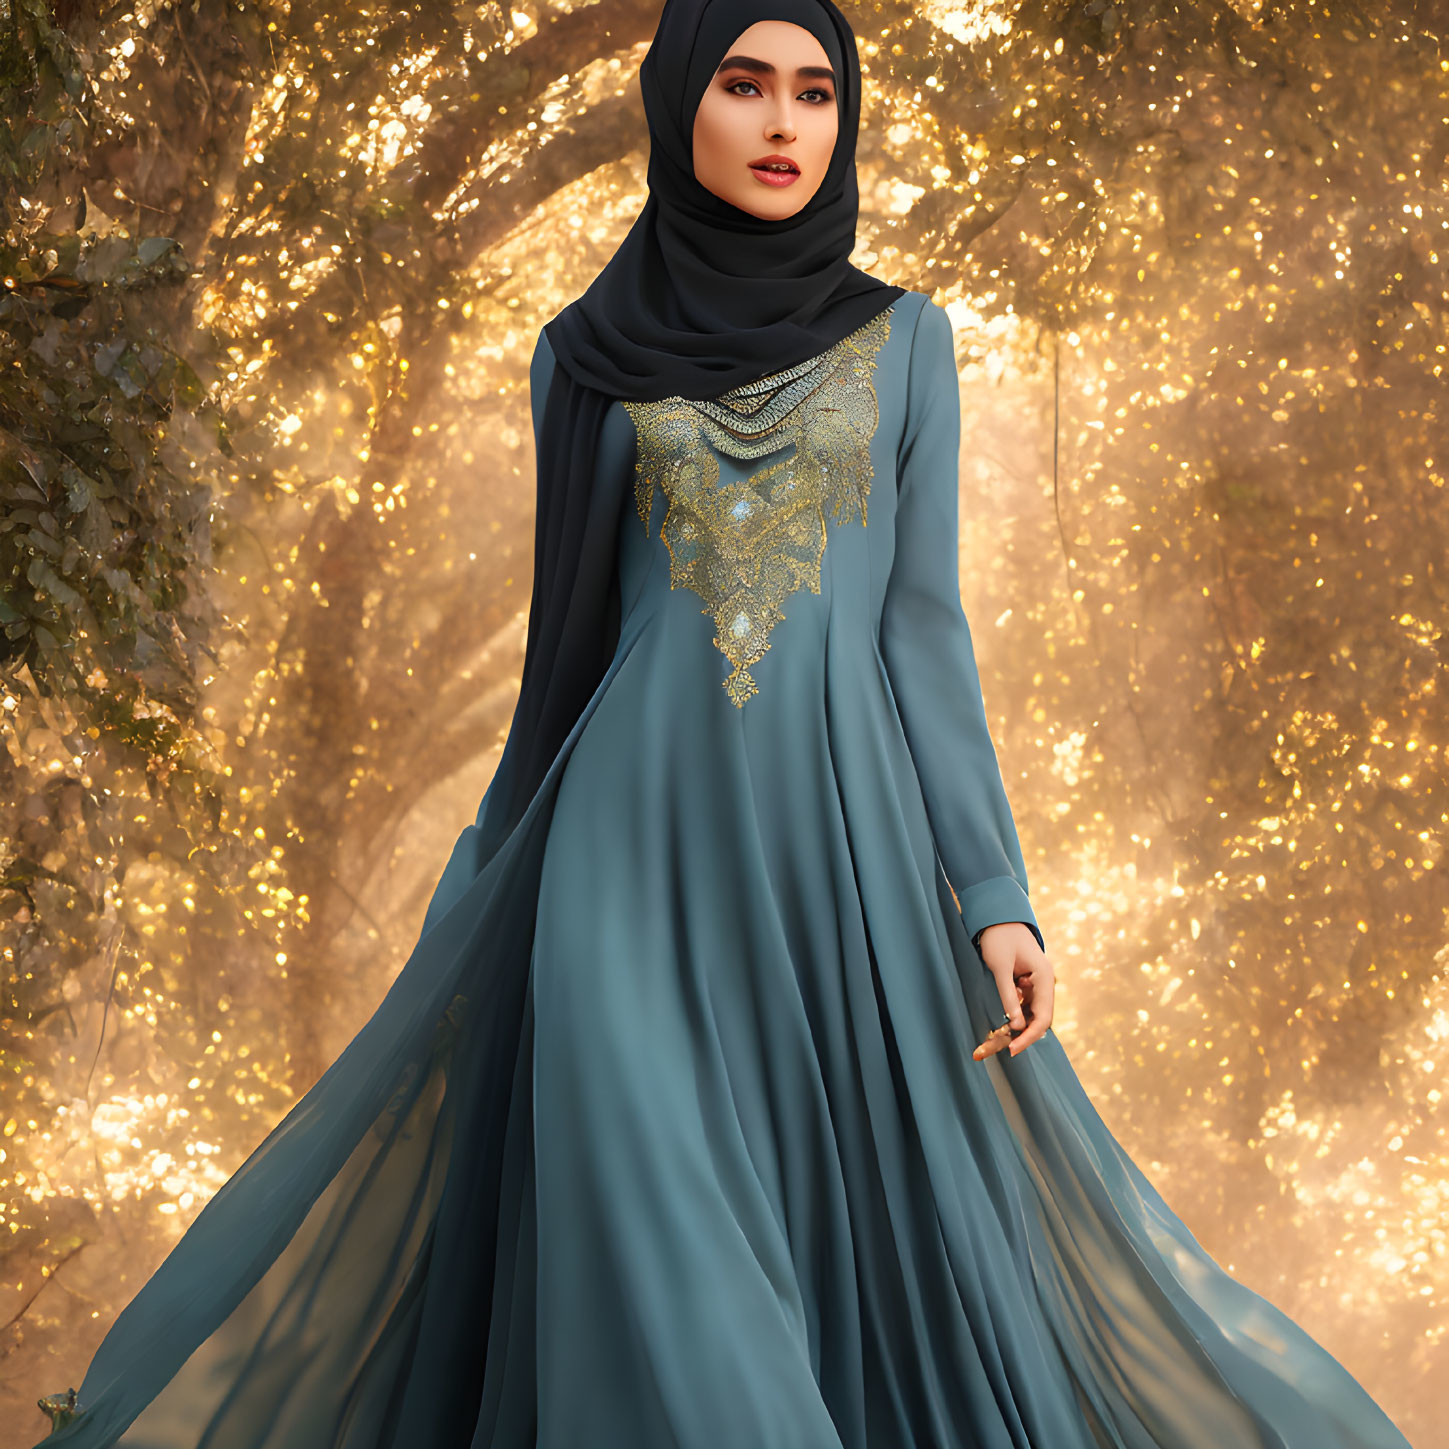 Woman in Teal Dress and Black Hijab Standing in Sunlit Autumn Forest